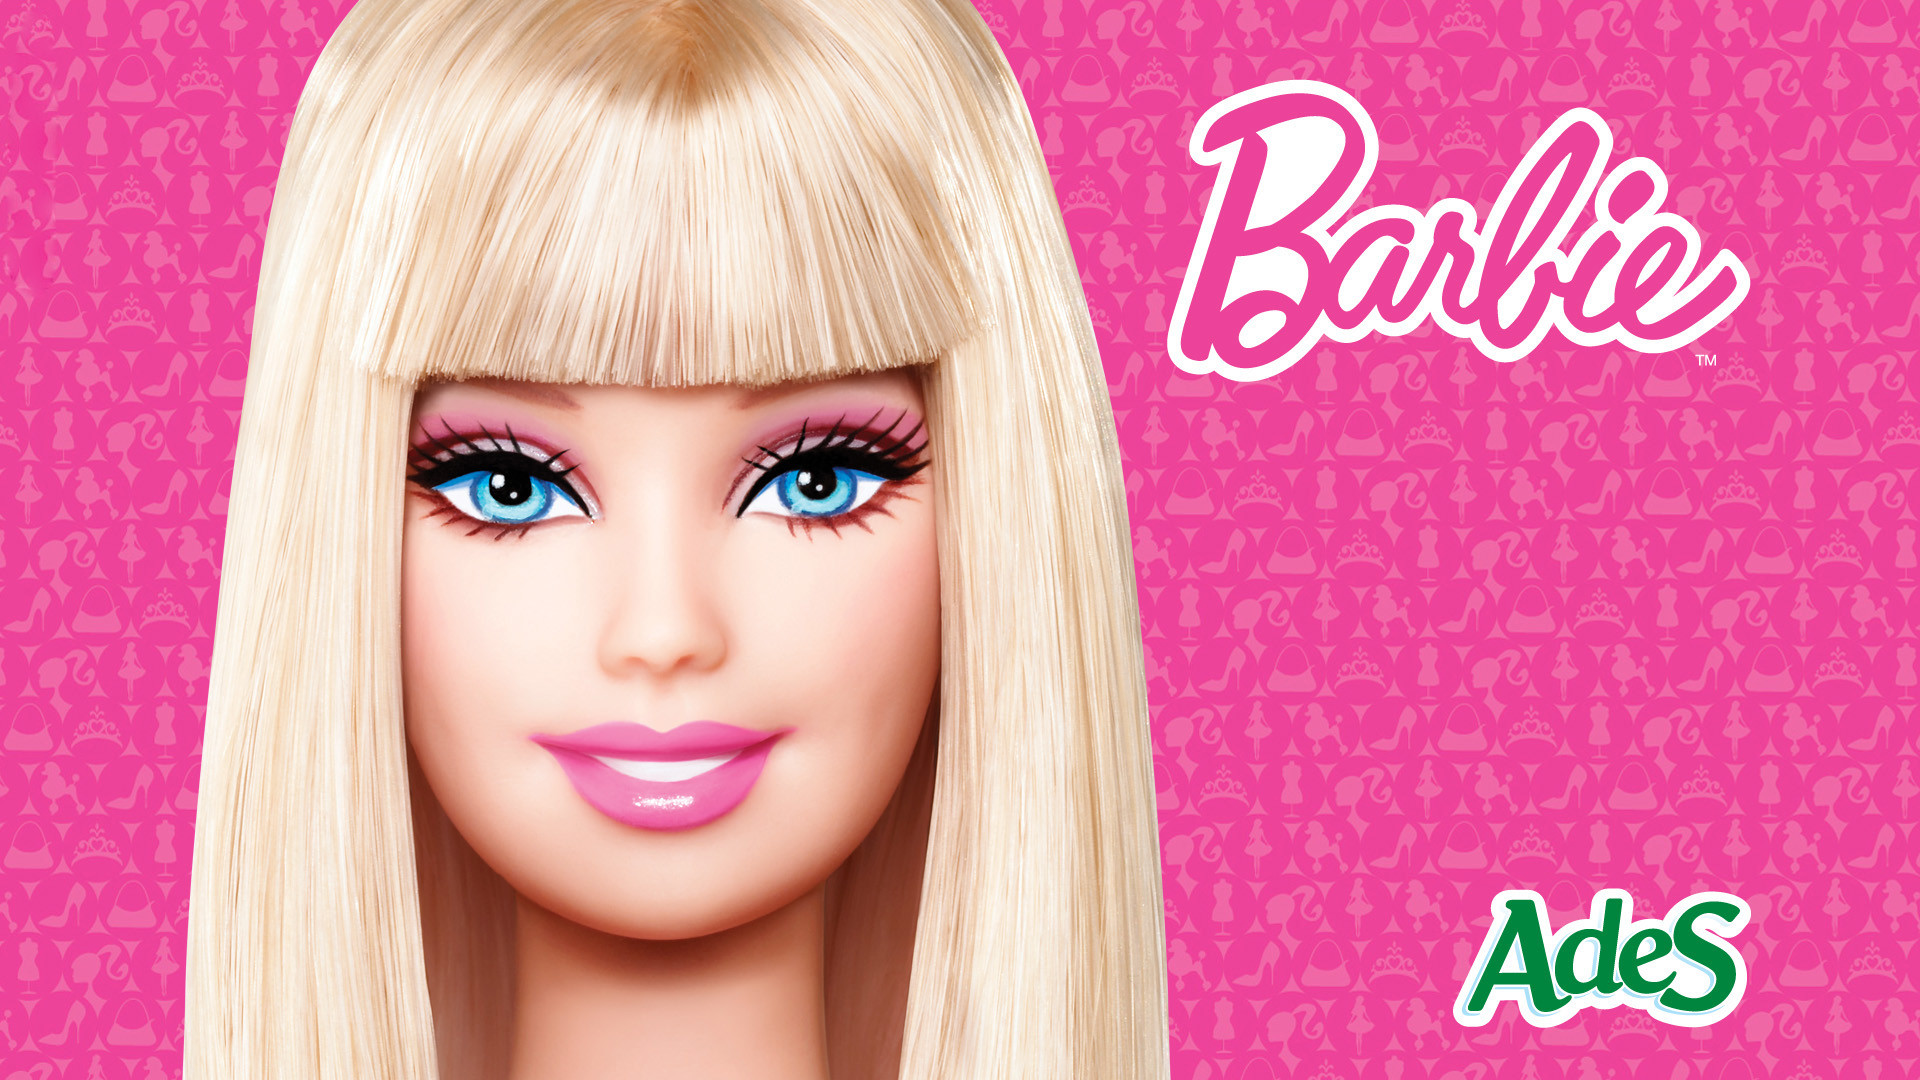 1920x1080 Backgrounds HD Barbie Wallpapers. 2009_approved_logo_pattern